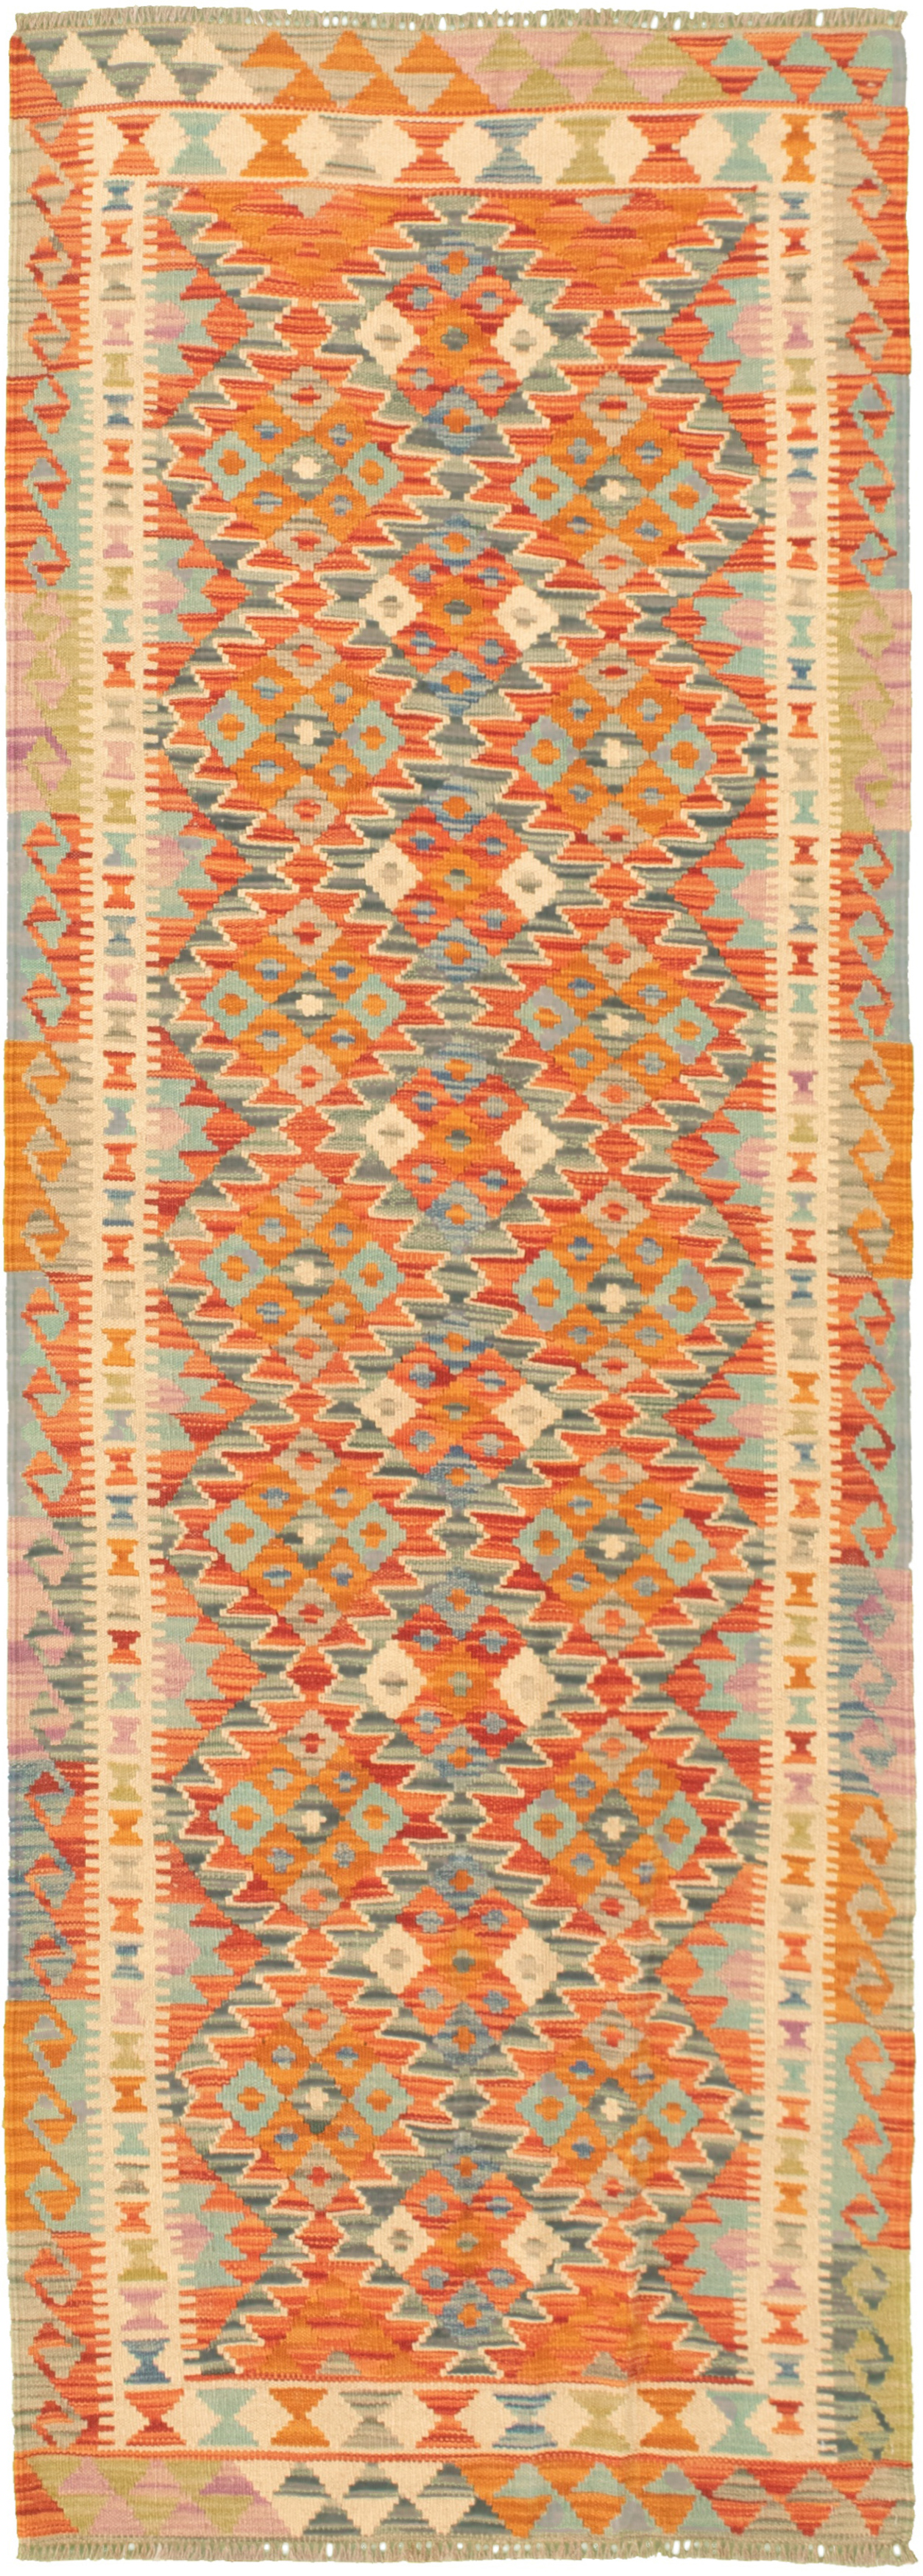 Hand woven Bold and Colorful  Dark Copper Wool Kilim 2'8" x 8'1" Size: 2'8" x 8'1"  